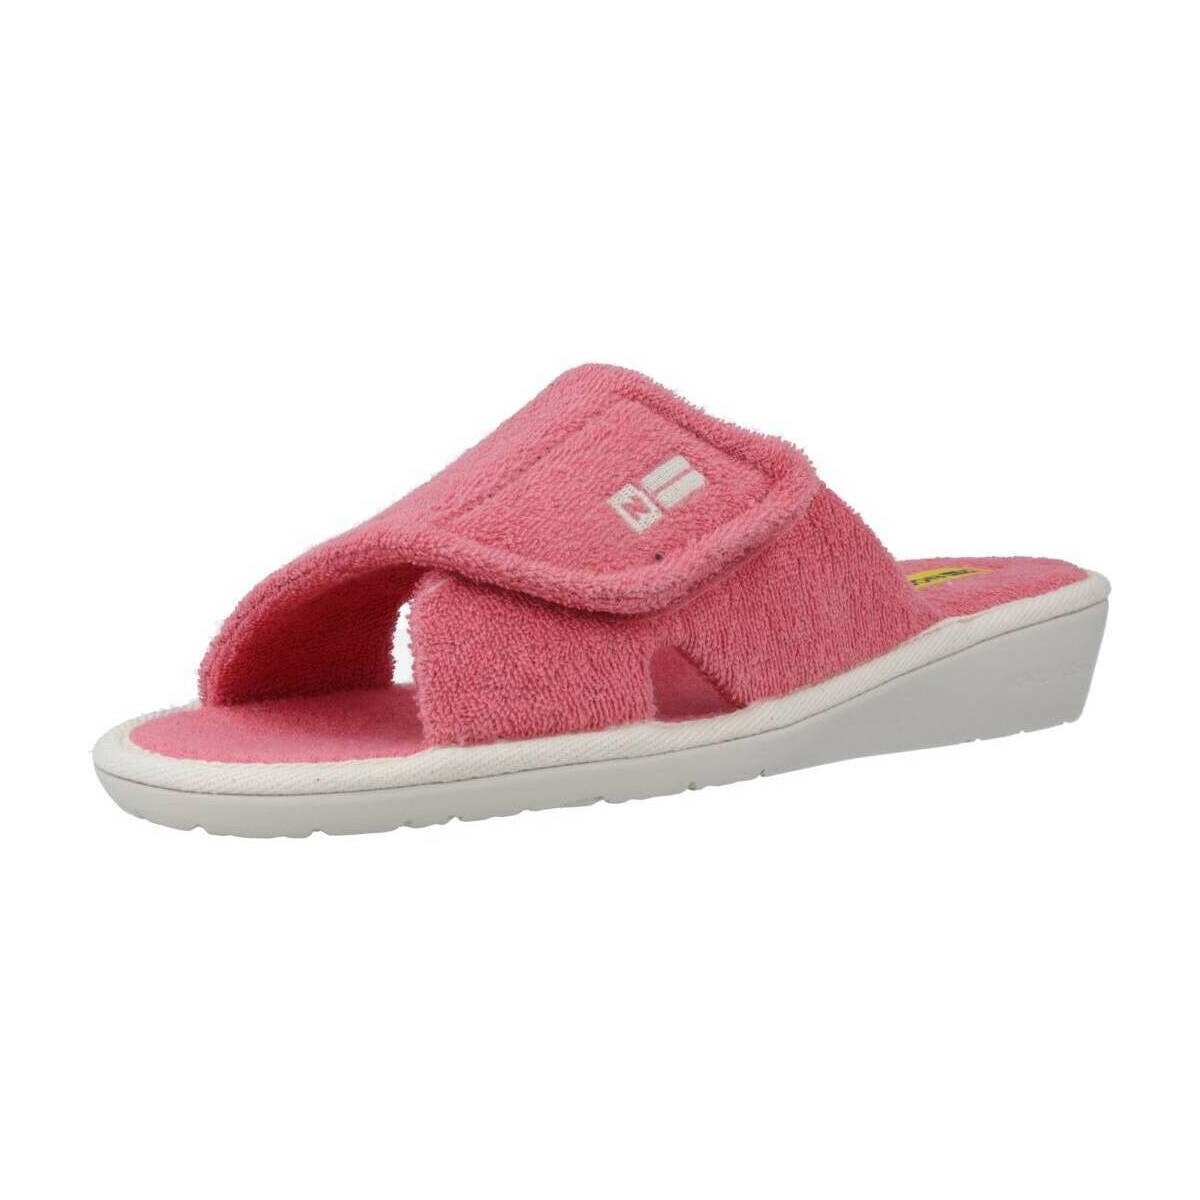 Nordikas Slippers in Pink from Spartoo GOOFASH